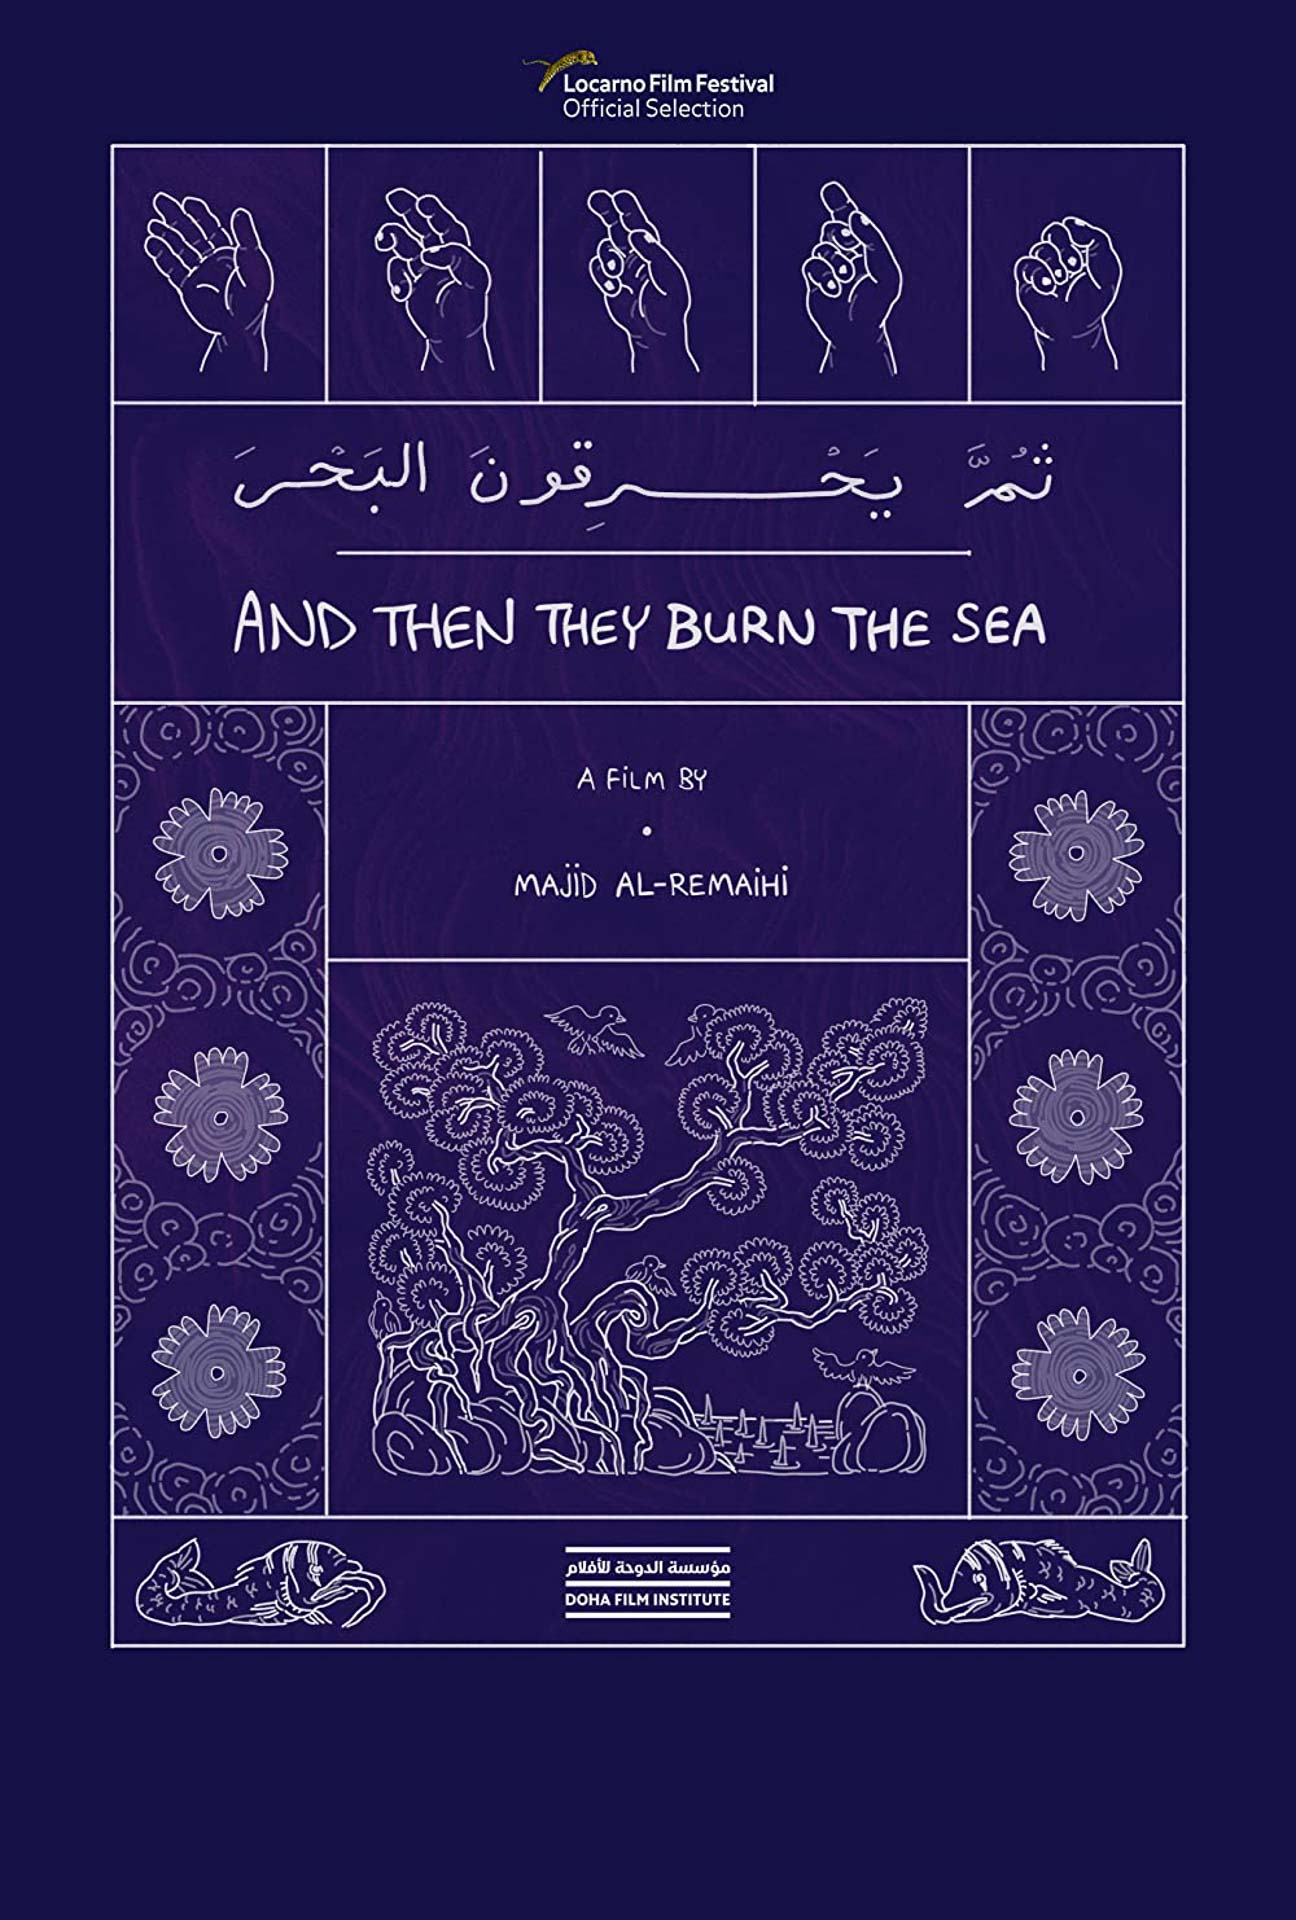 Film And Then They Burn The Sea poster